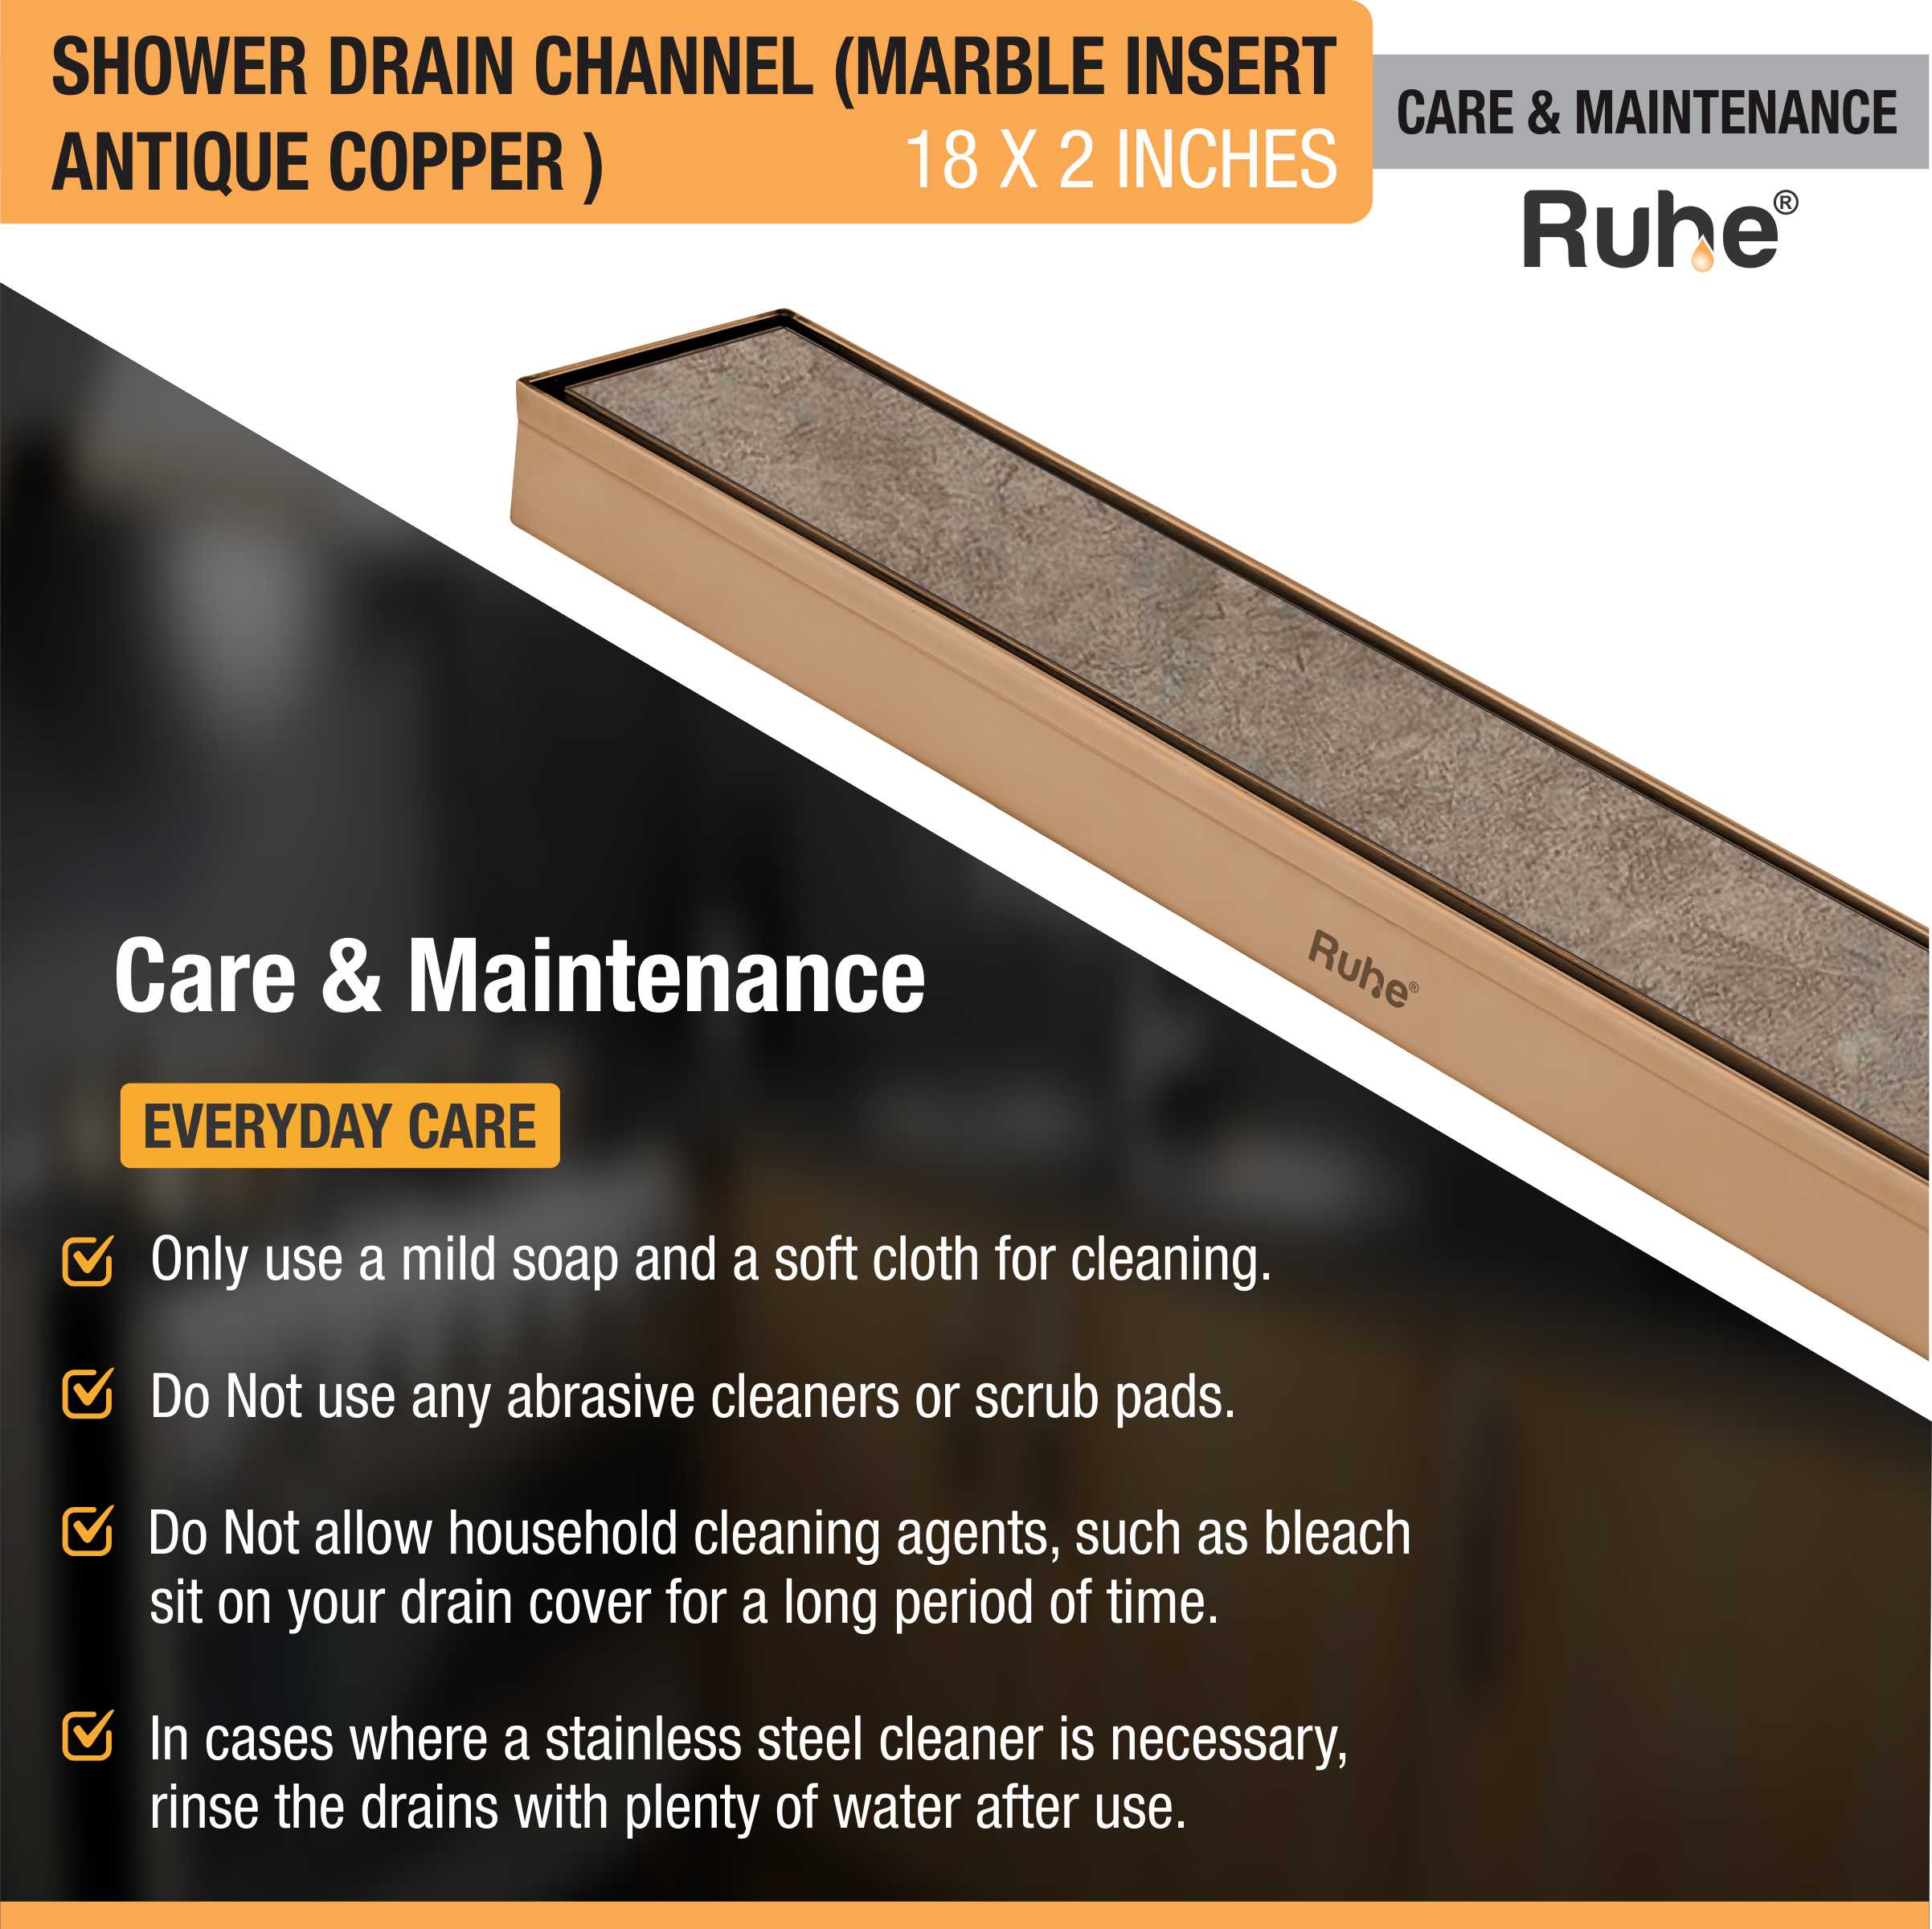 Marble Insert Shower Drain Channel (18 x 2 Inches) ANTIQUE COPPER care and maintenance